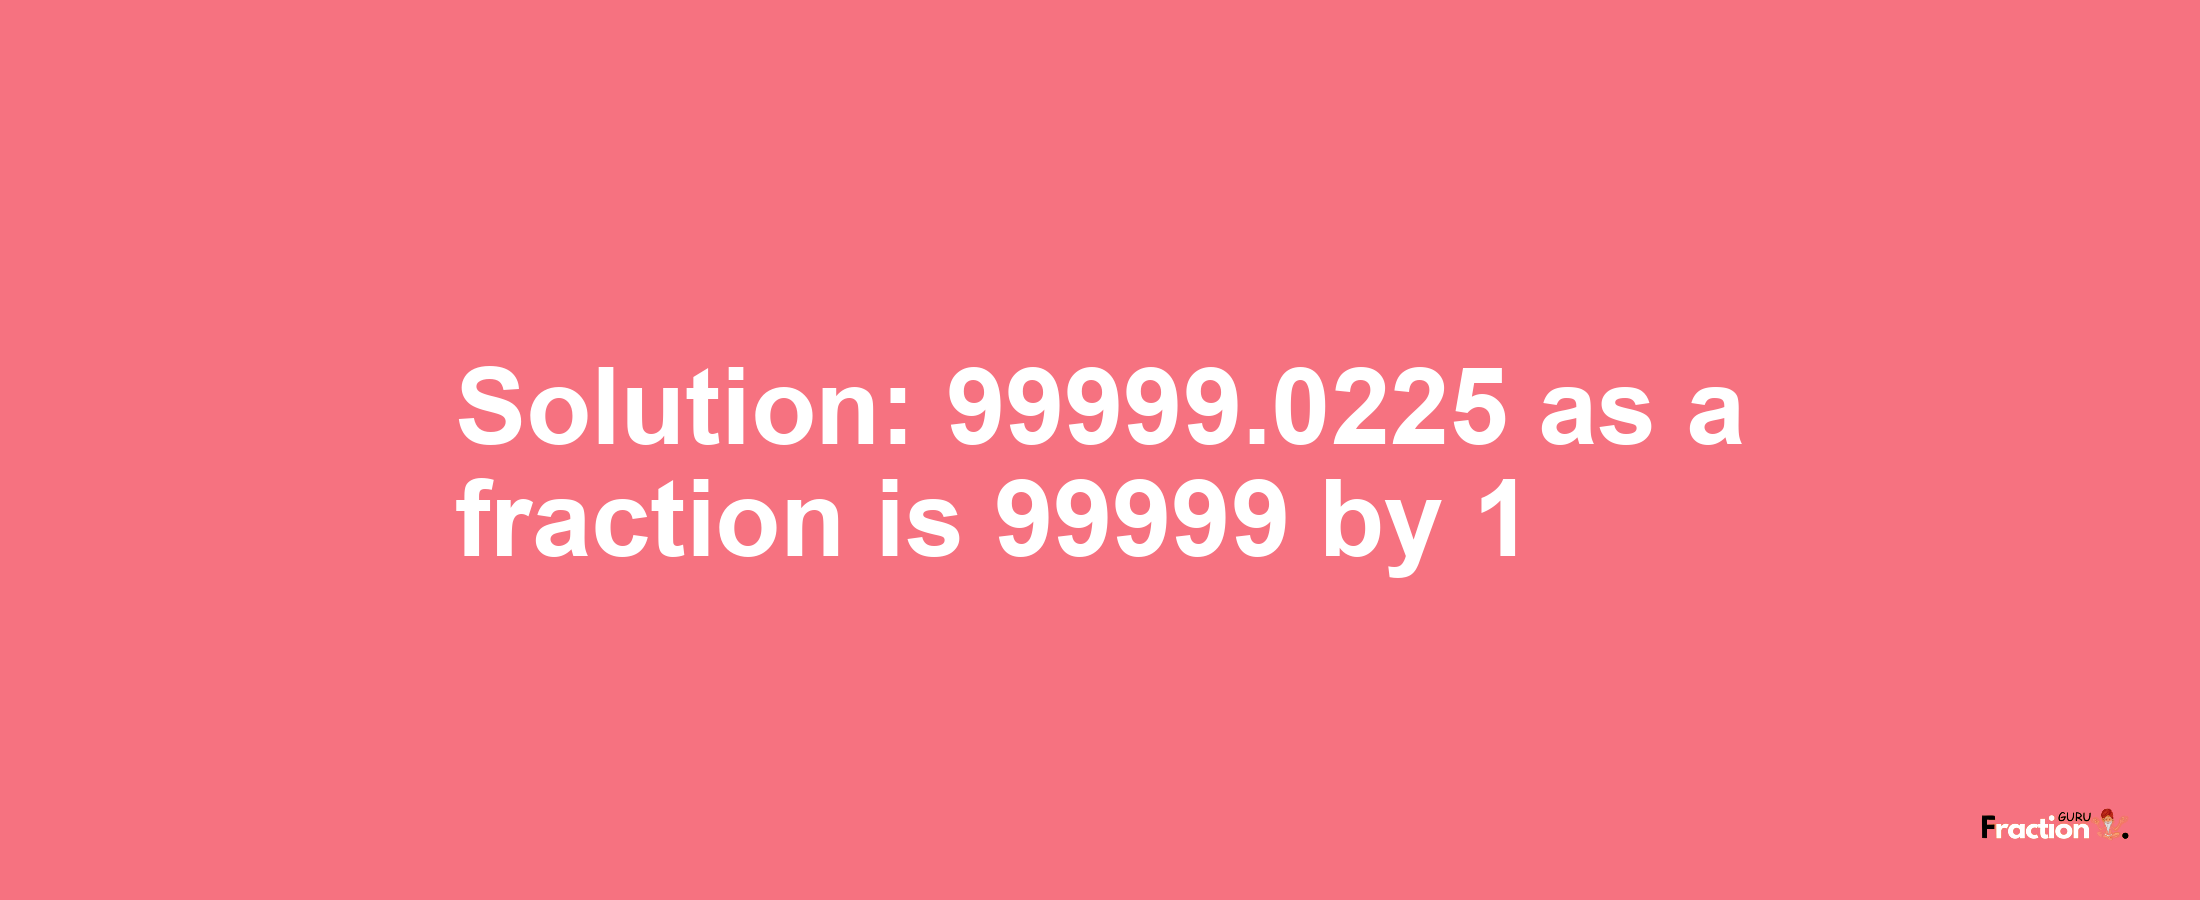 Solution:99999.0225 as a fraction is 99999/1